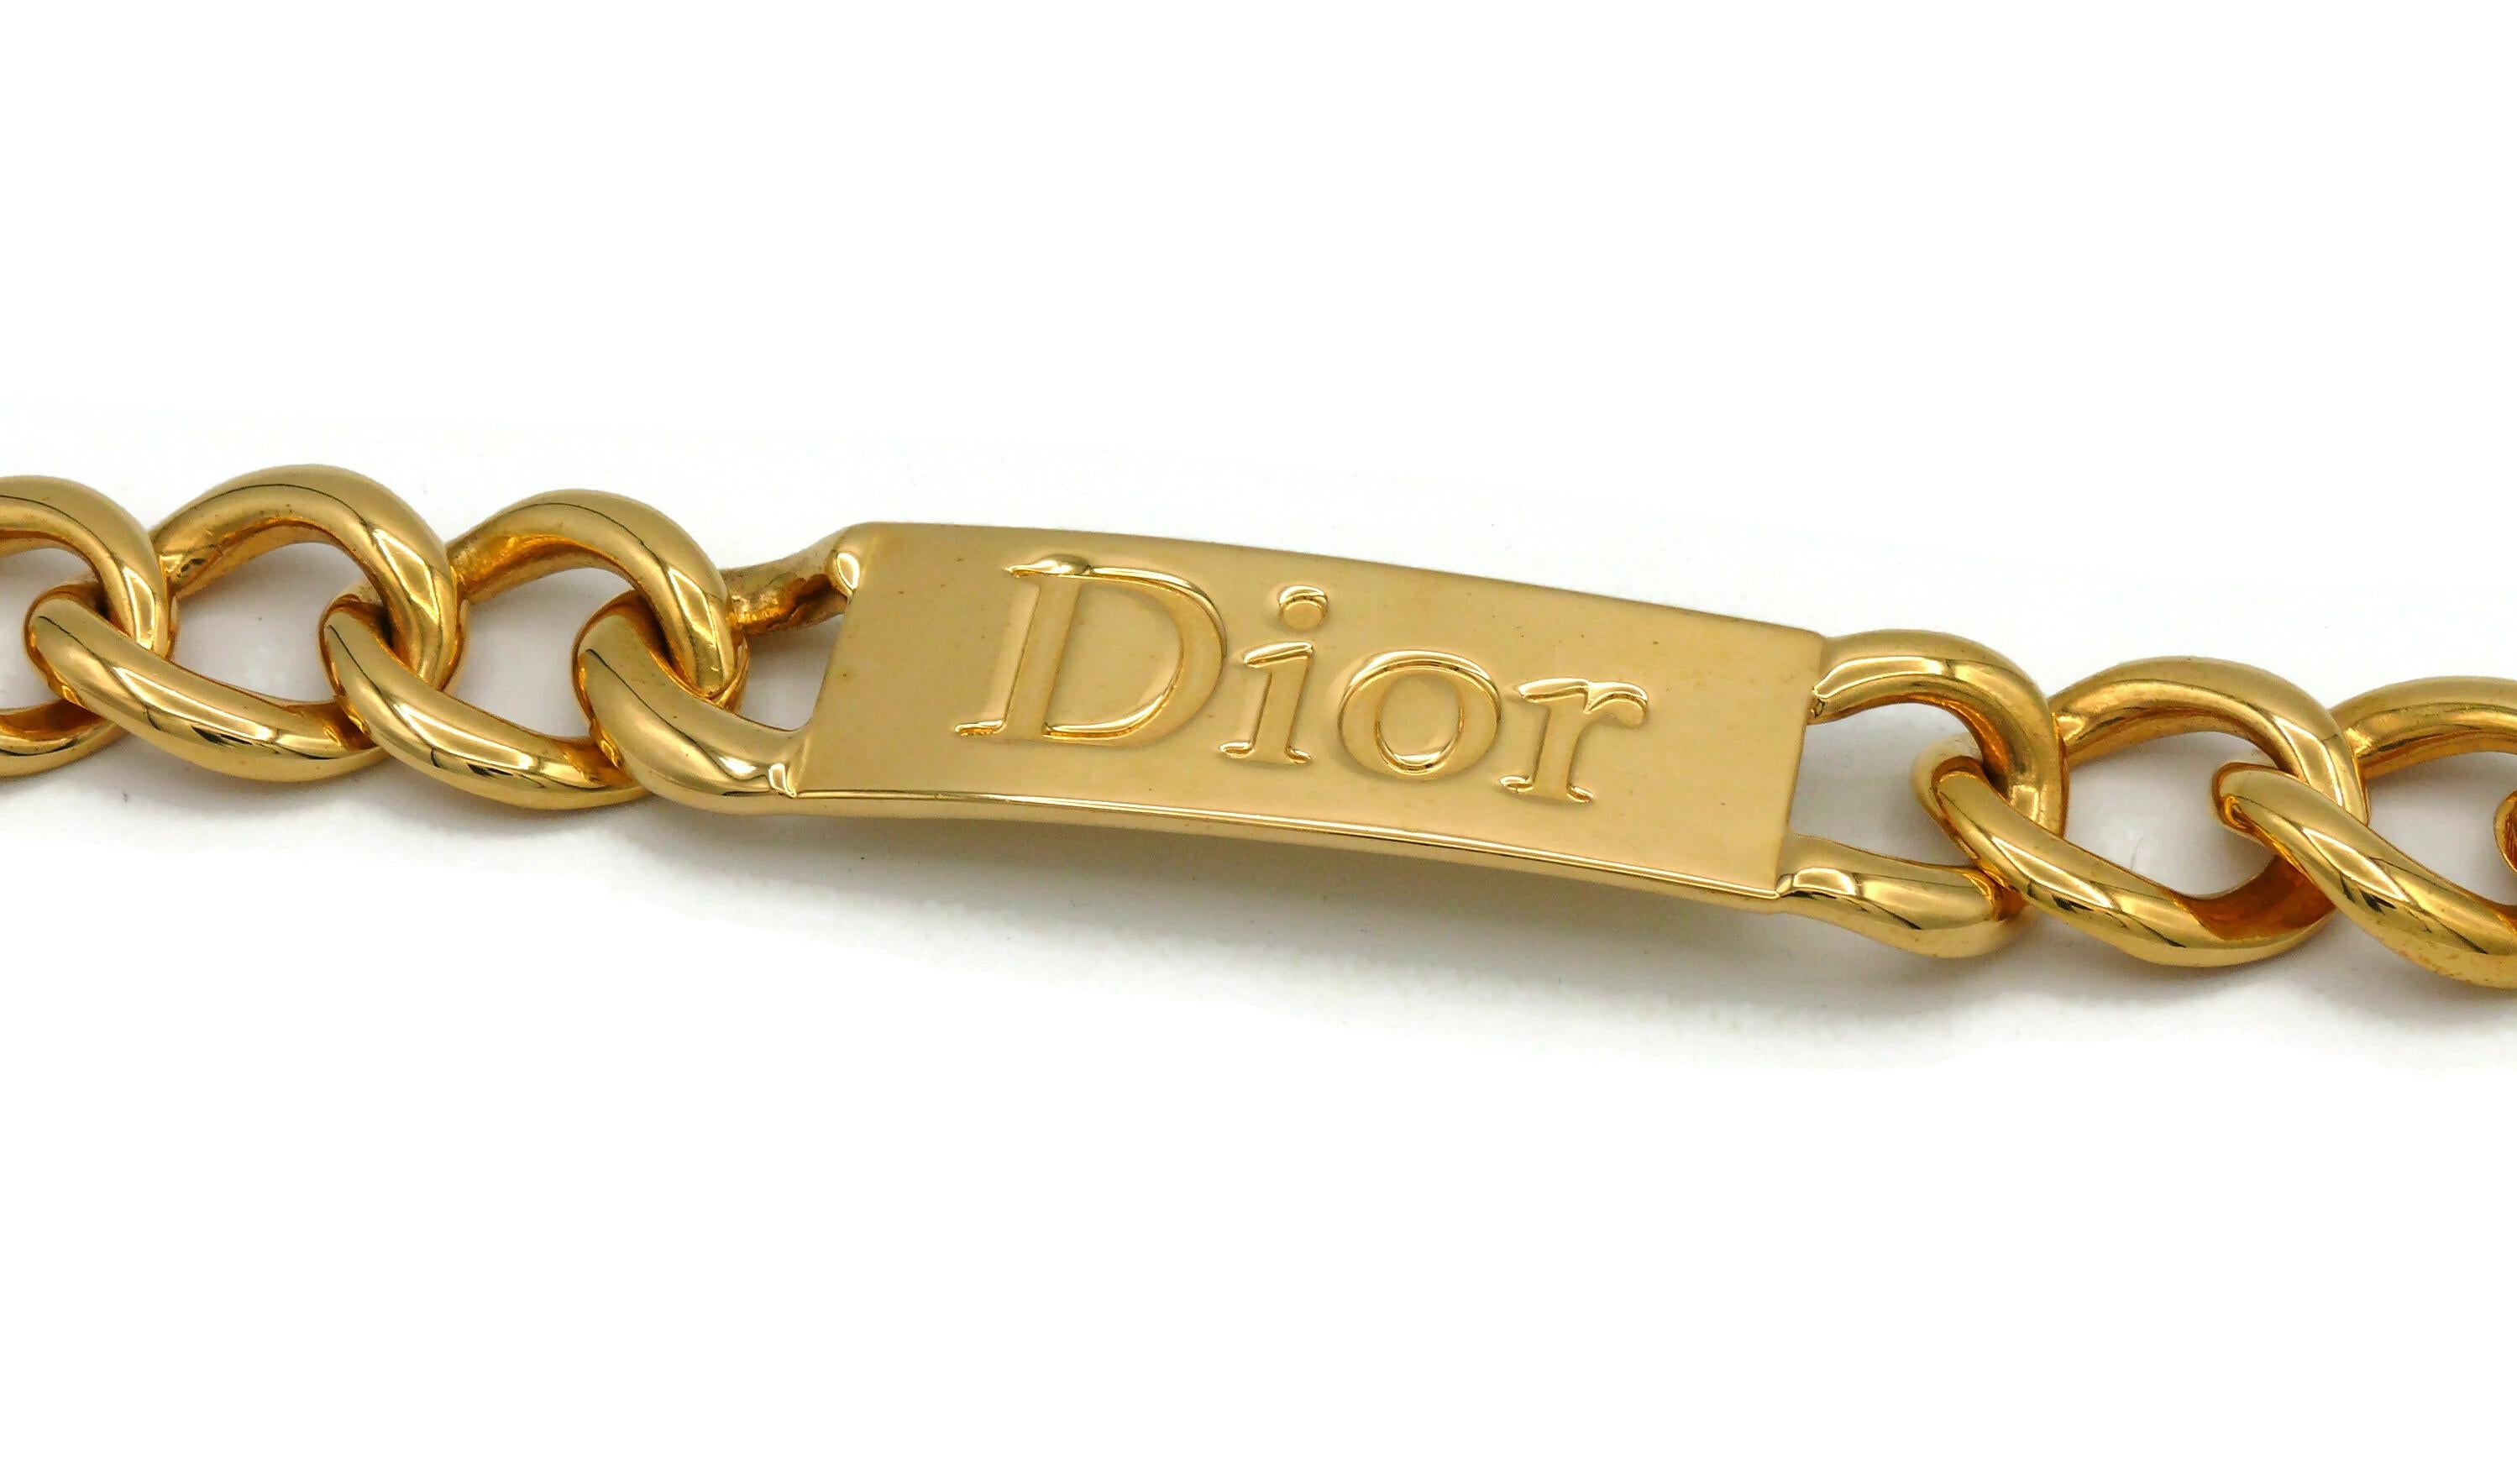 CHRISTIAN DIOR by JOHN GALLIANO Massive Gold Tone ID Tag Chain Necklace, 2000 For Sale 1